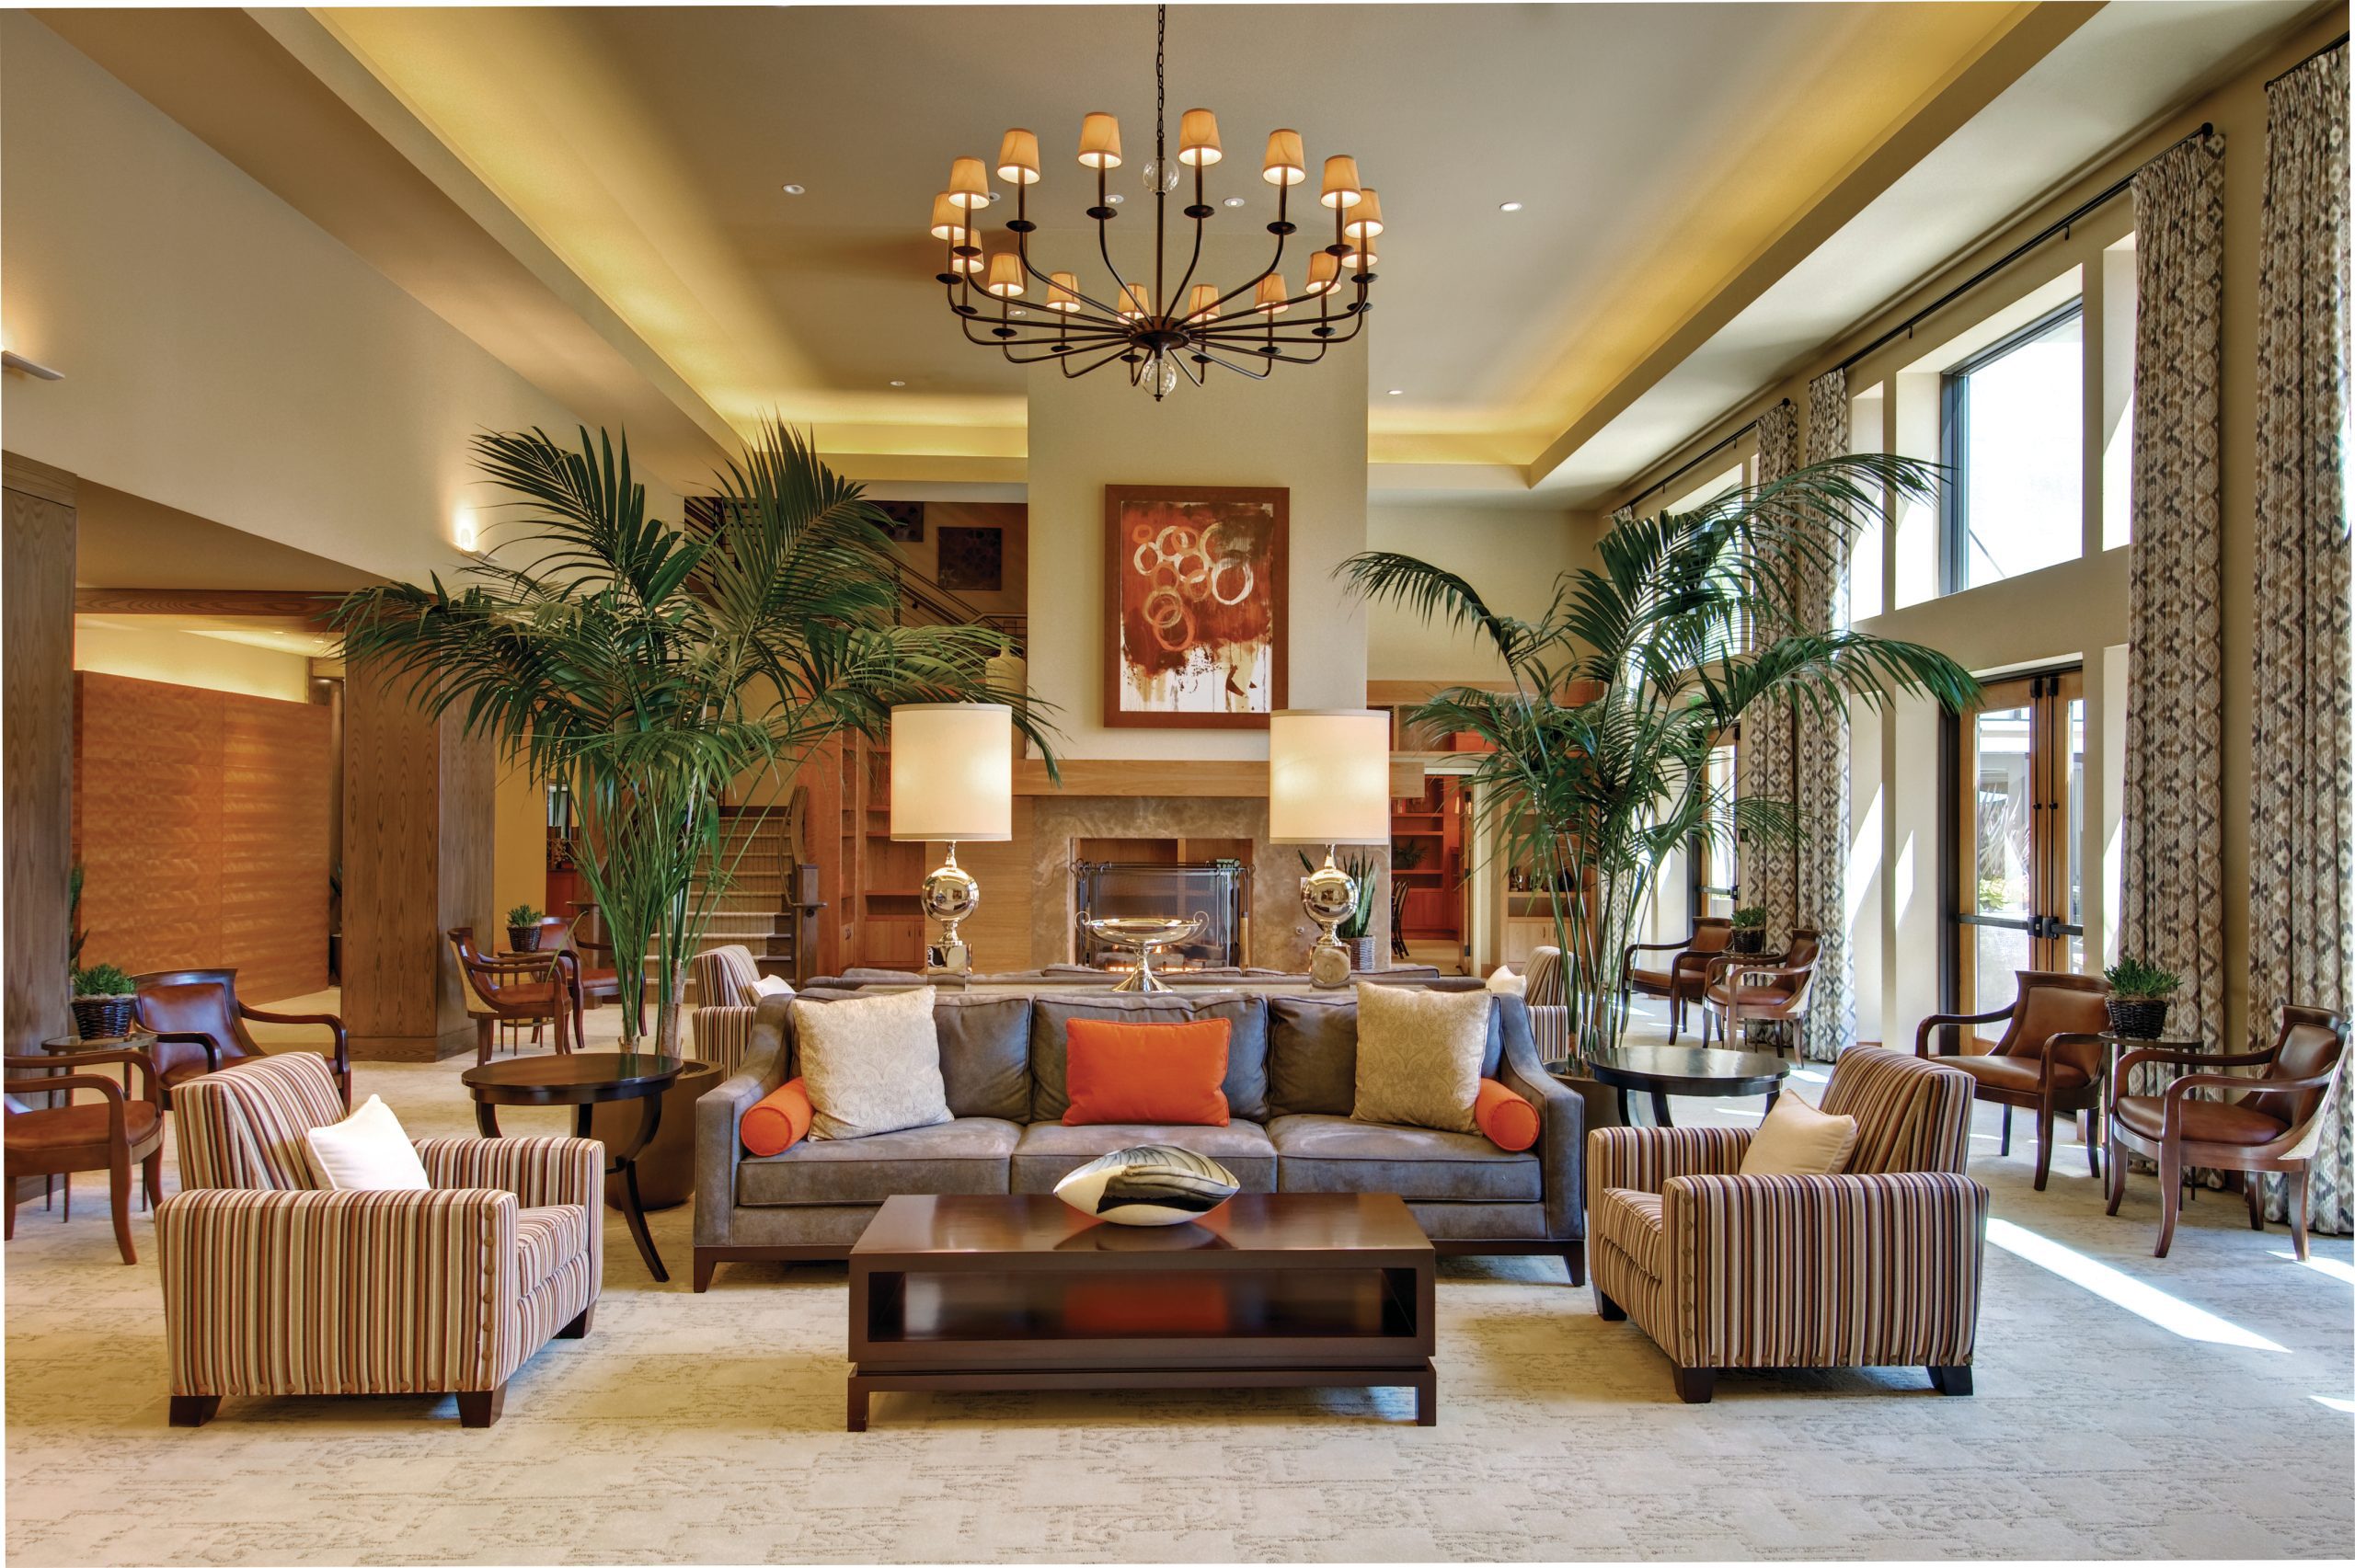 A well-furnished living room with comfortable seating, a stylish coffee table, and an elegant chandelier.